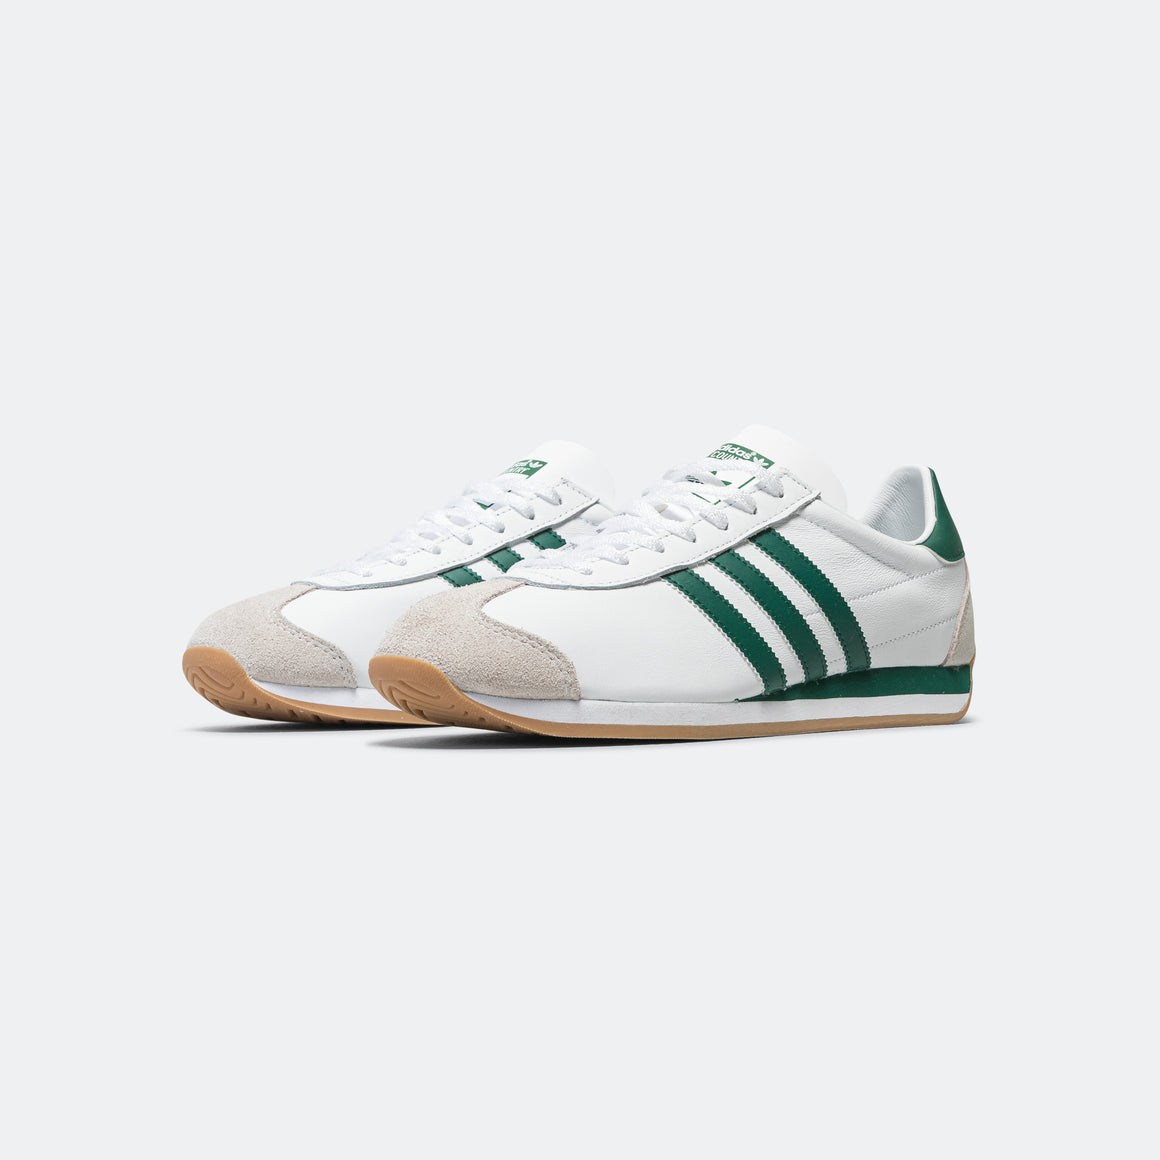 adidas - Country OG - Footwear White/Core Green - UP THERE